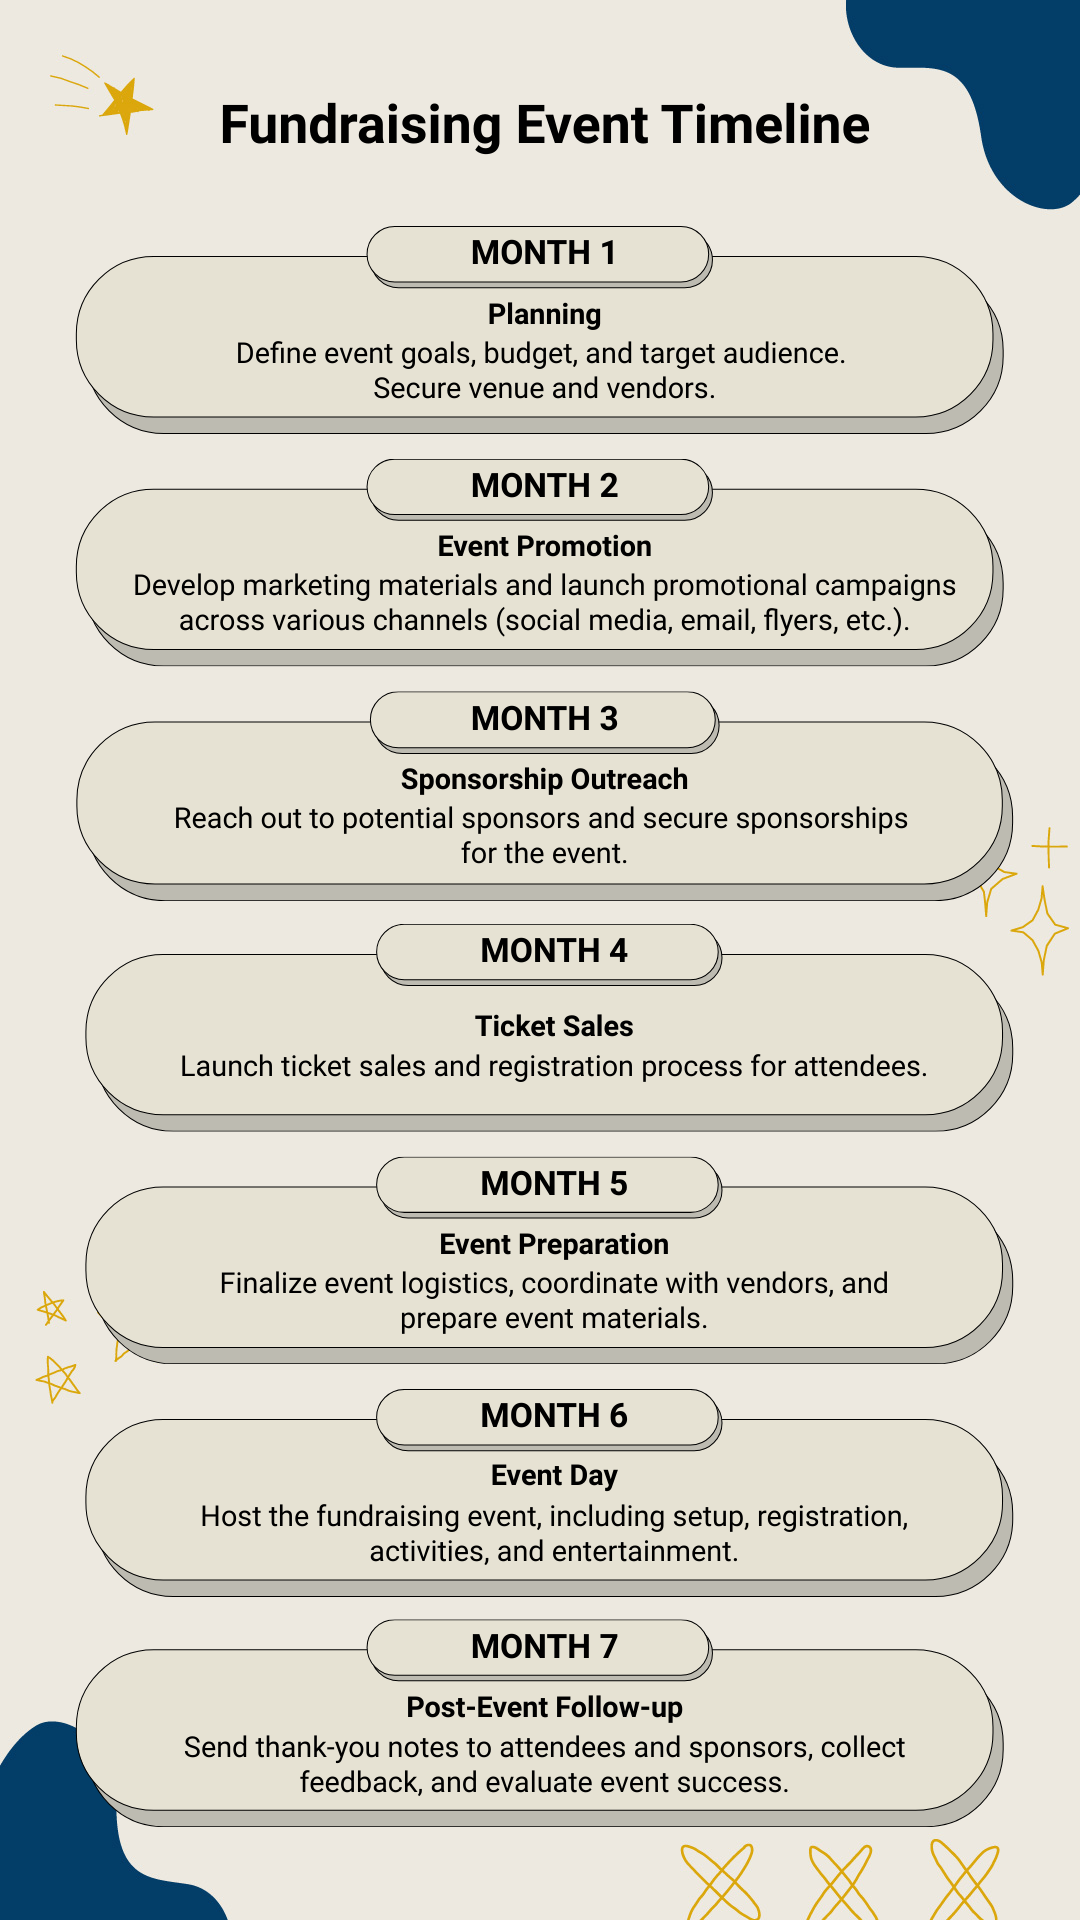 Fundraising Event Timeline